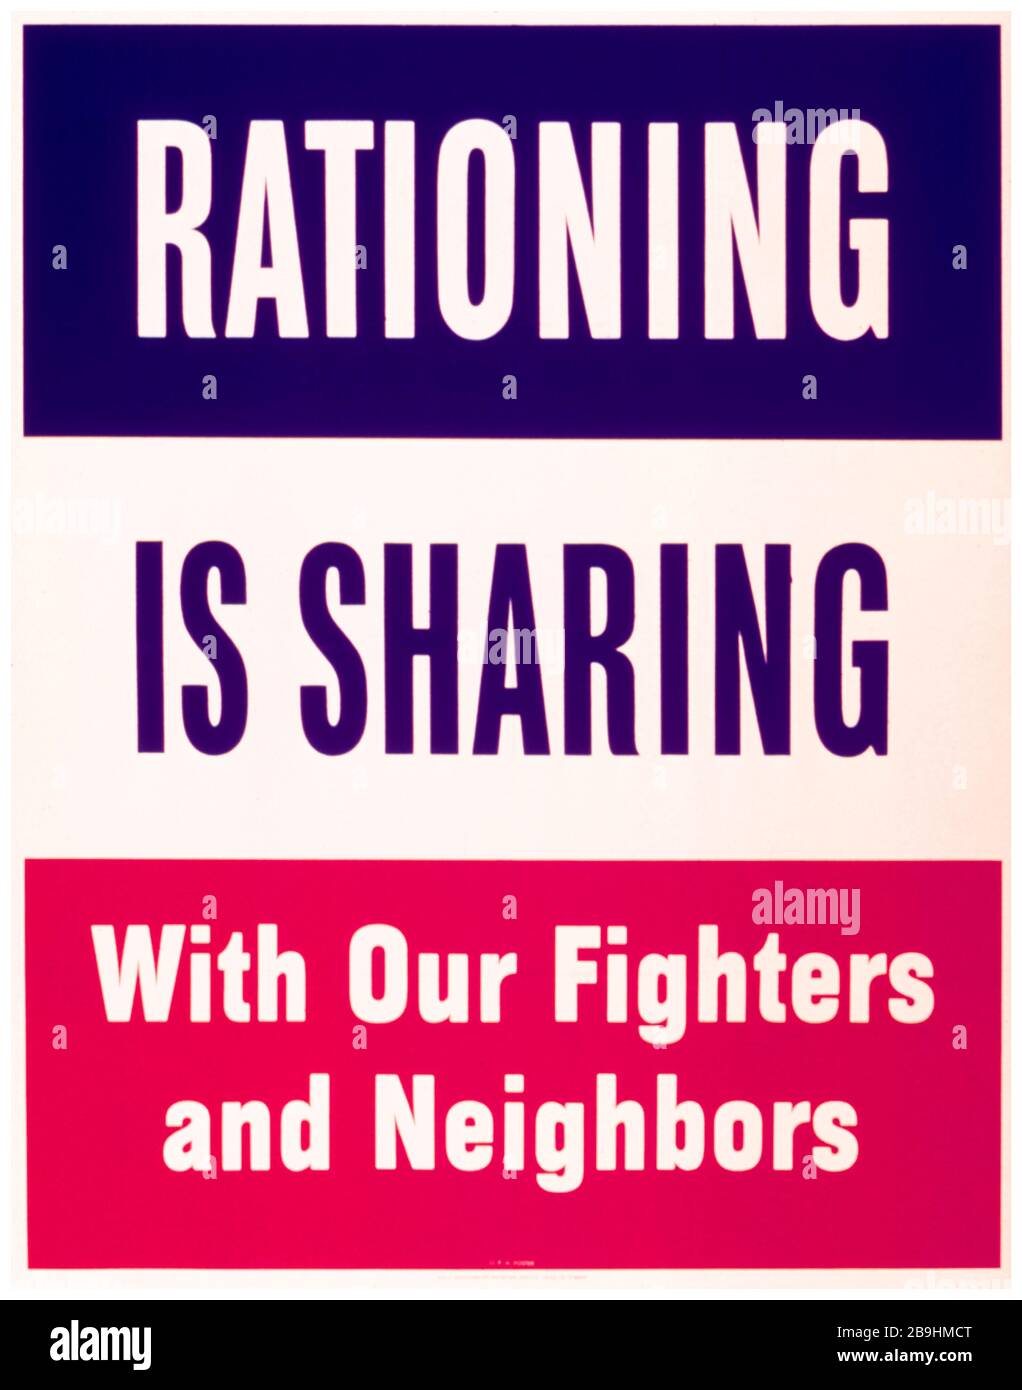 USA WW2 Food rationing poster, Rationing is sharing with our fighters and neighbors,1941-1945 Stock Photo